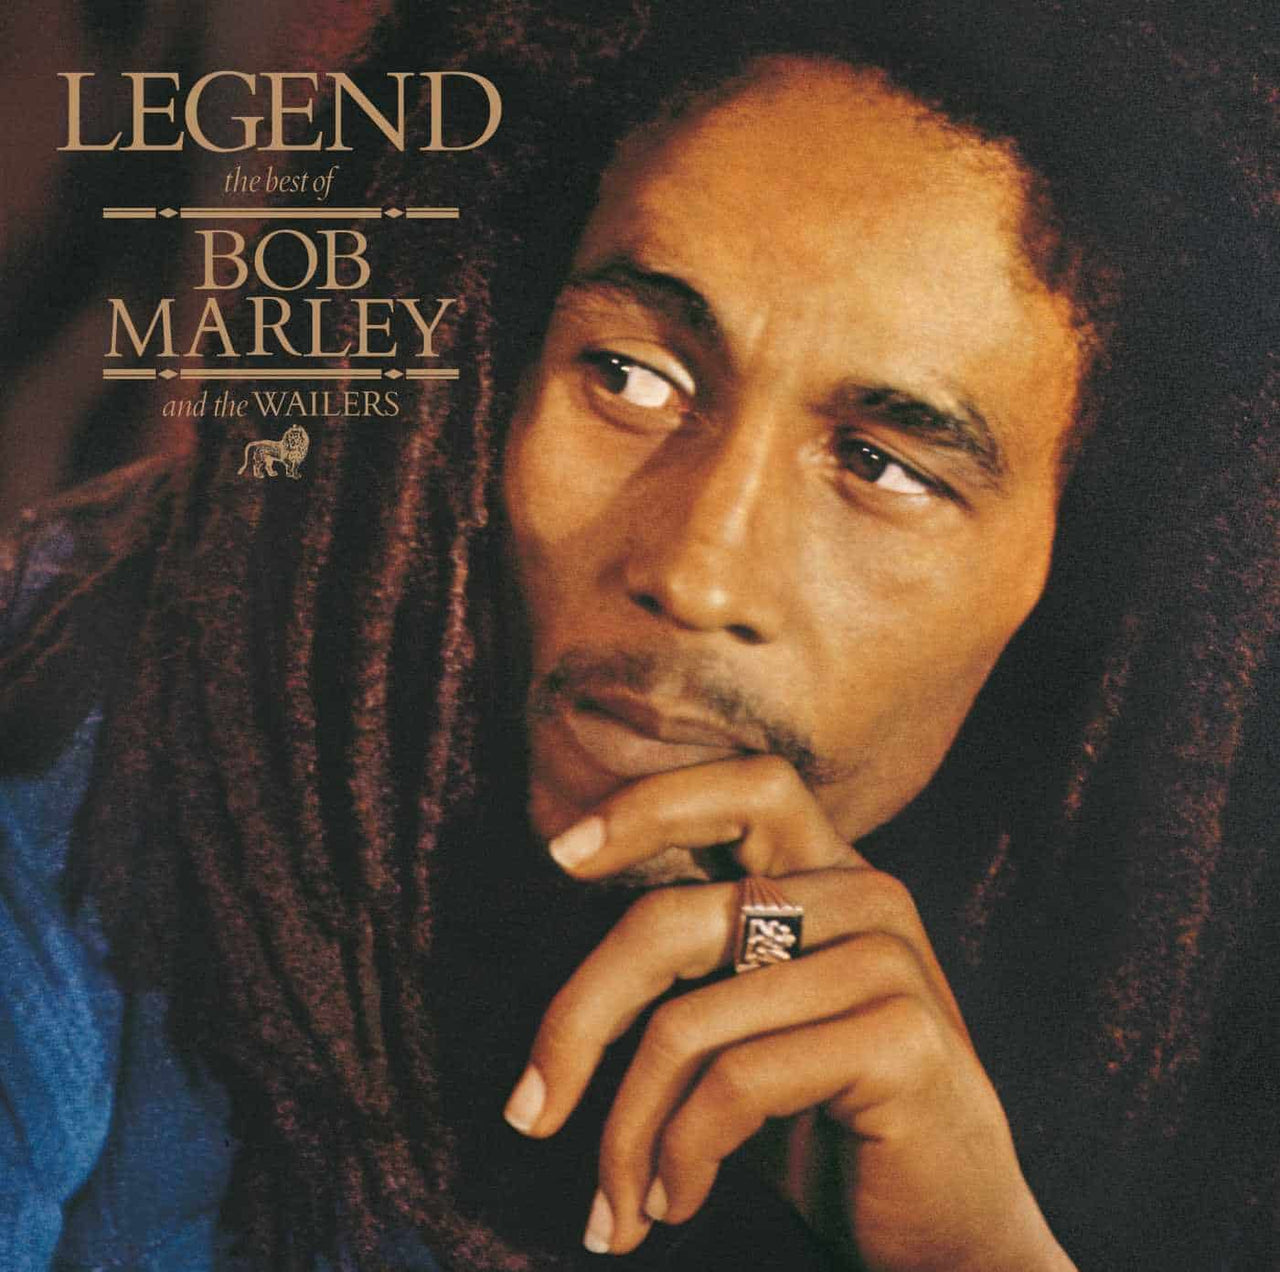 BOB MARLEY AND THE WAILERS - LEGEND (1LP)